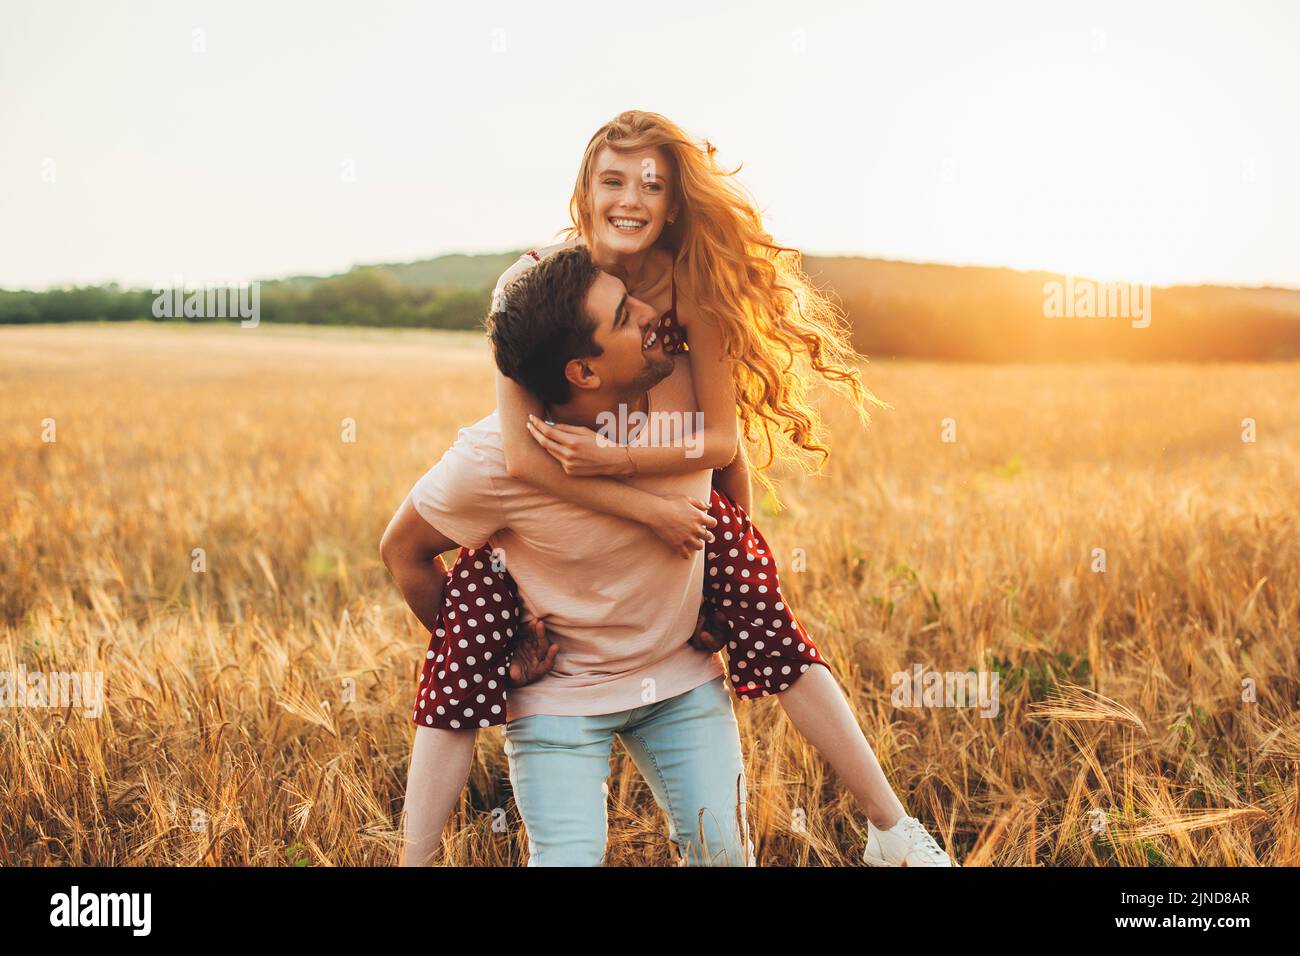 Caucasian man giving the girl a piggy back ride as they smile at the camera while enjoying a day in the country. Harvesting agriculture and plantation Stock Photo